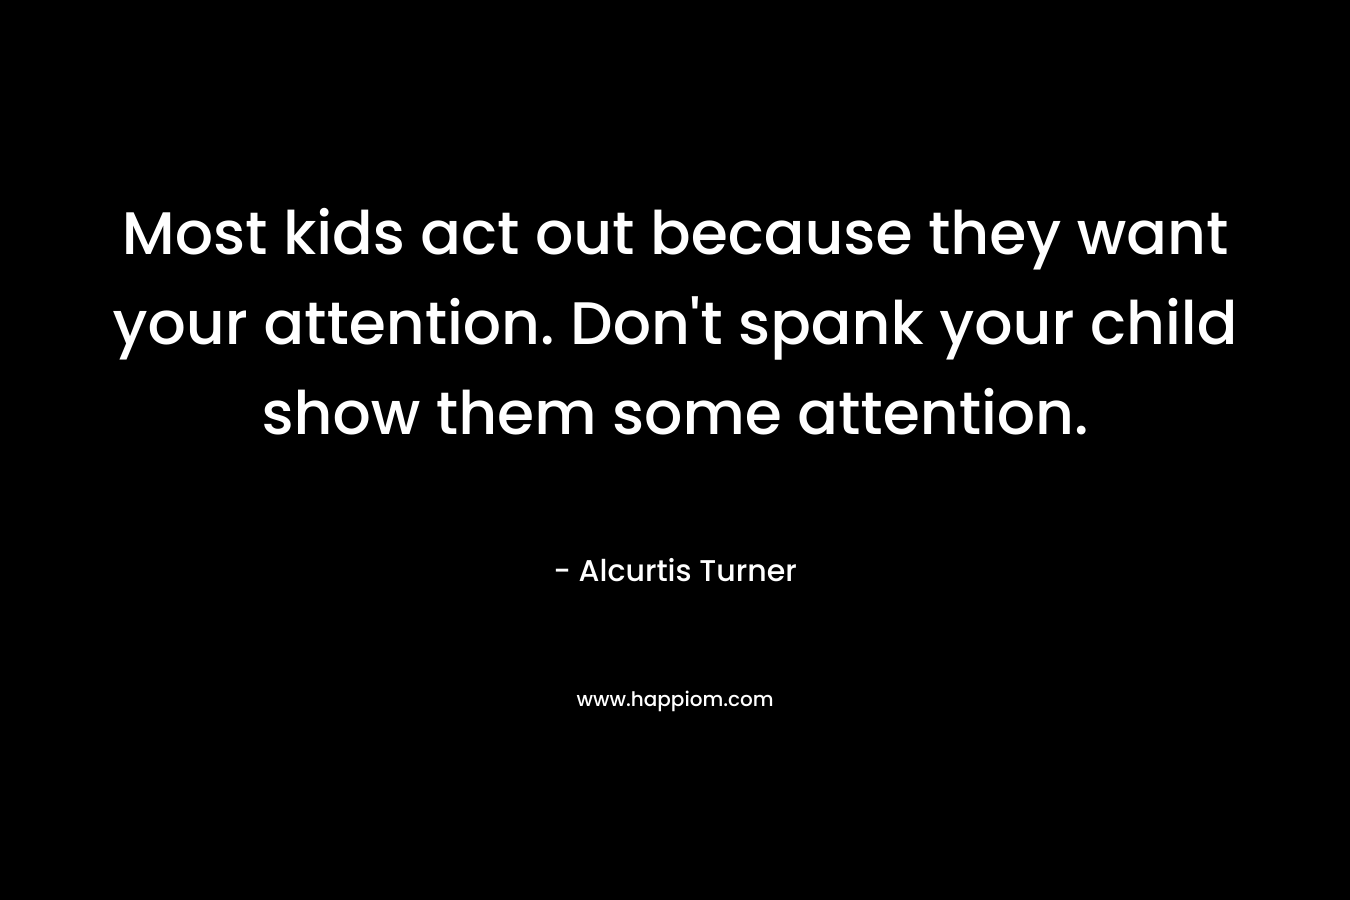 Most kids act out because they want your attention. Don’t spank your child show them some attention. – Alcurtis Turner